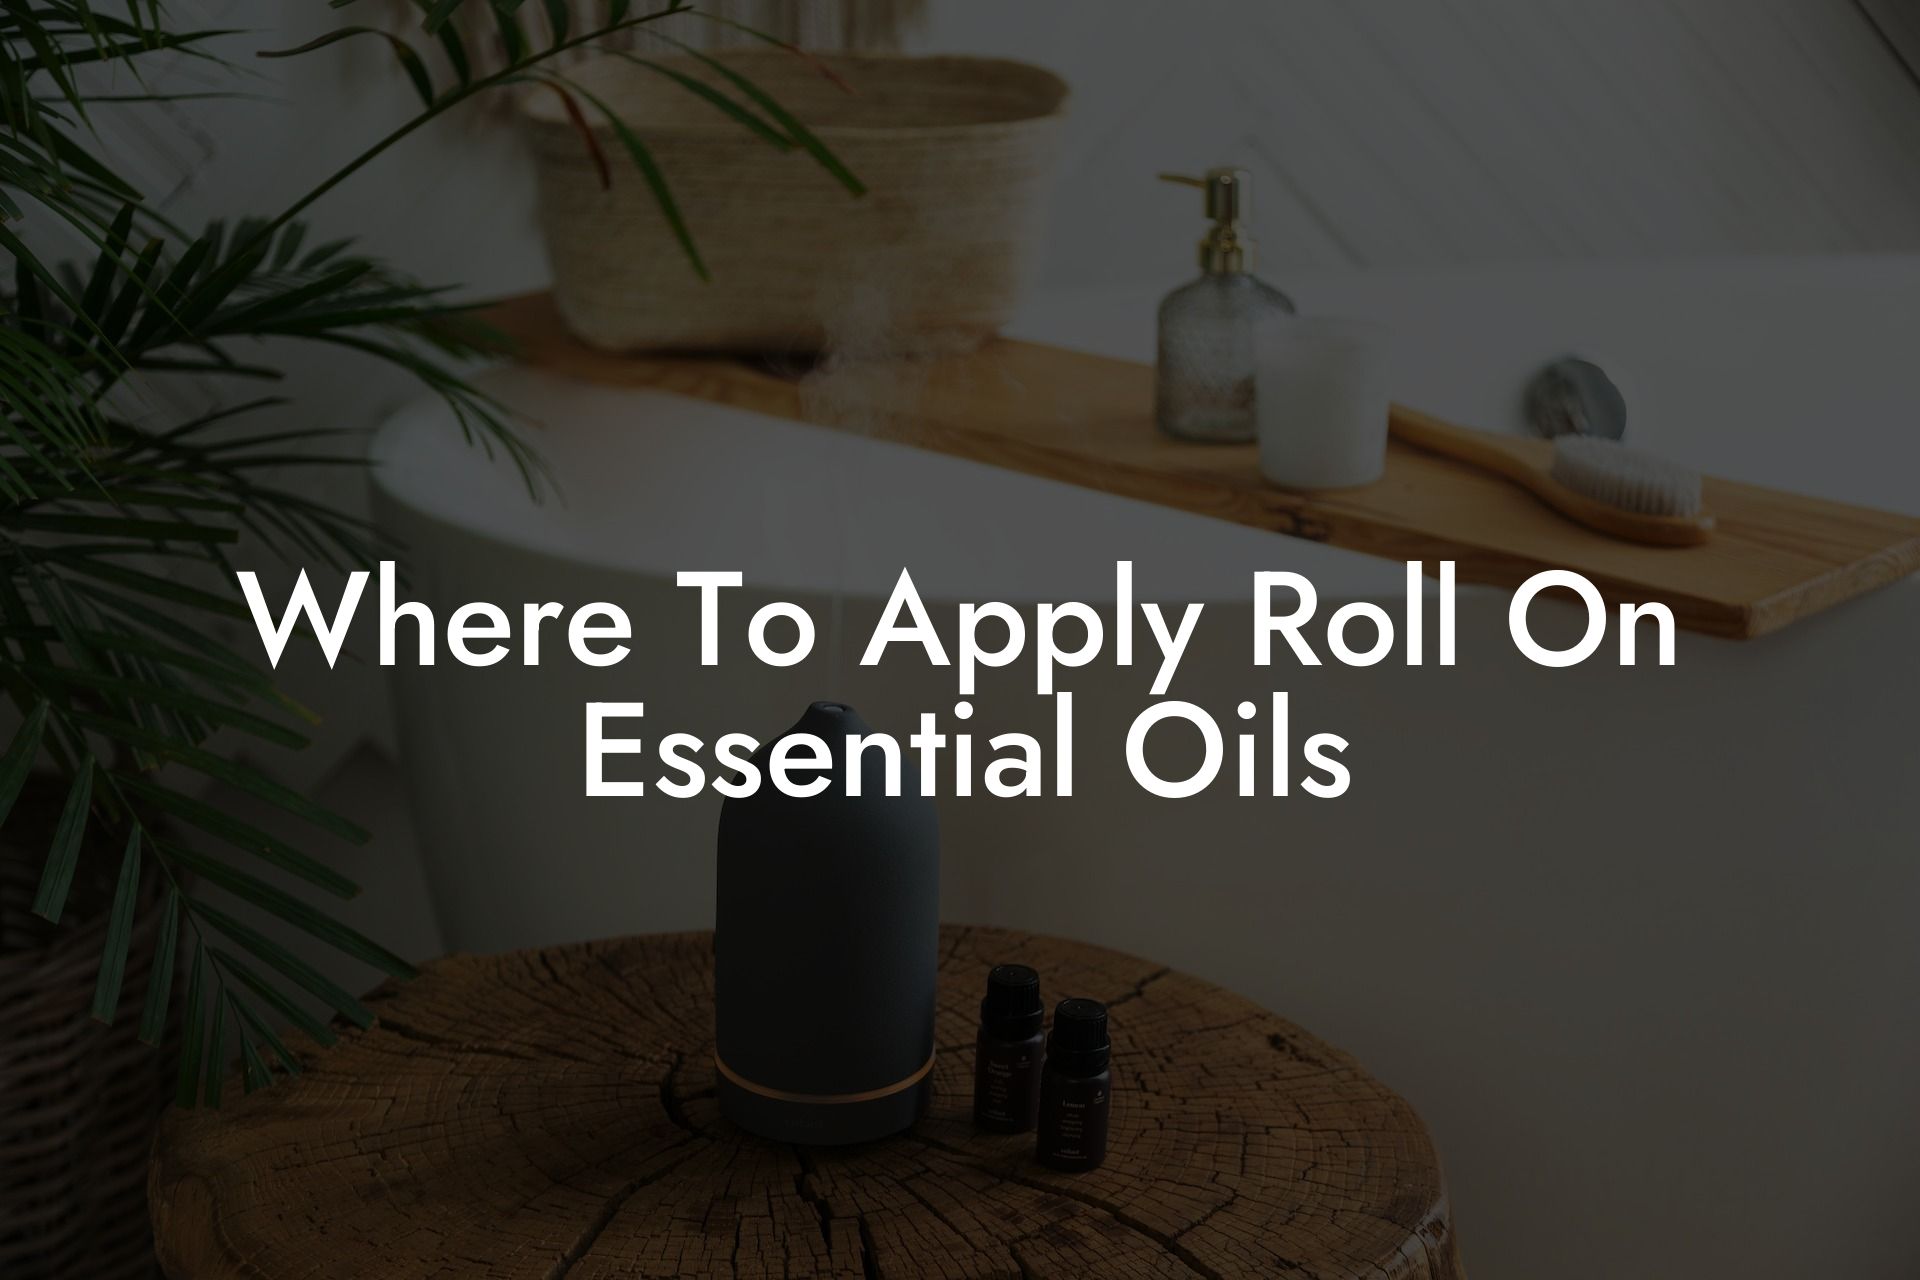 Where To Apply Roll On Essential Oils